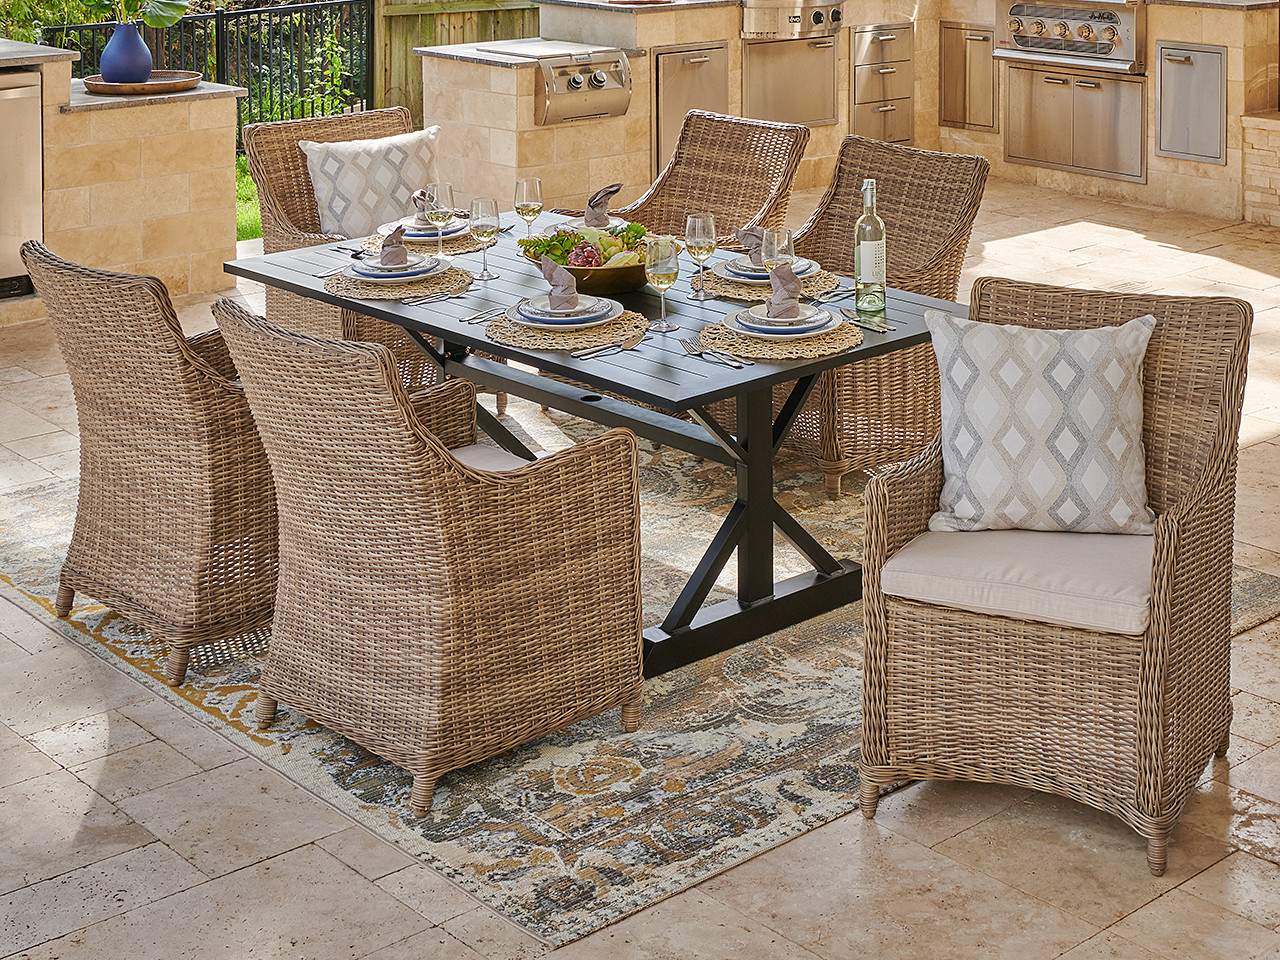 Valencia Driftwood Outdoor Wicker and Canvas Flax Cushion 7 Pc. Dining Set with 72 x 39 in. Table